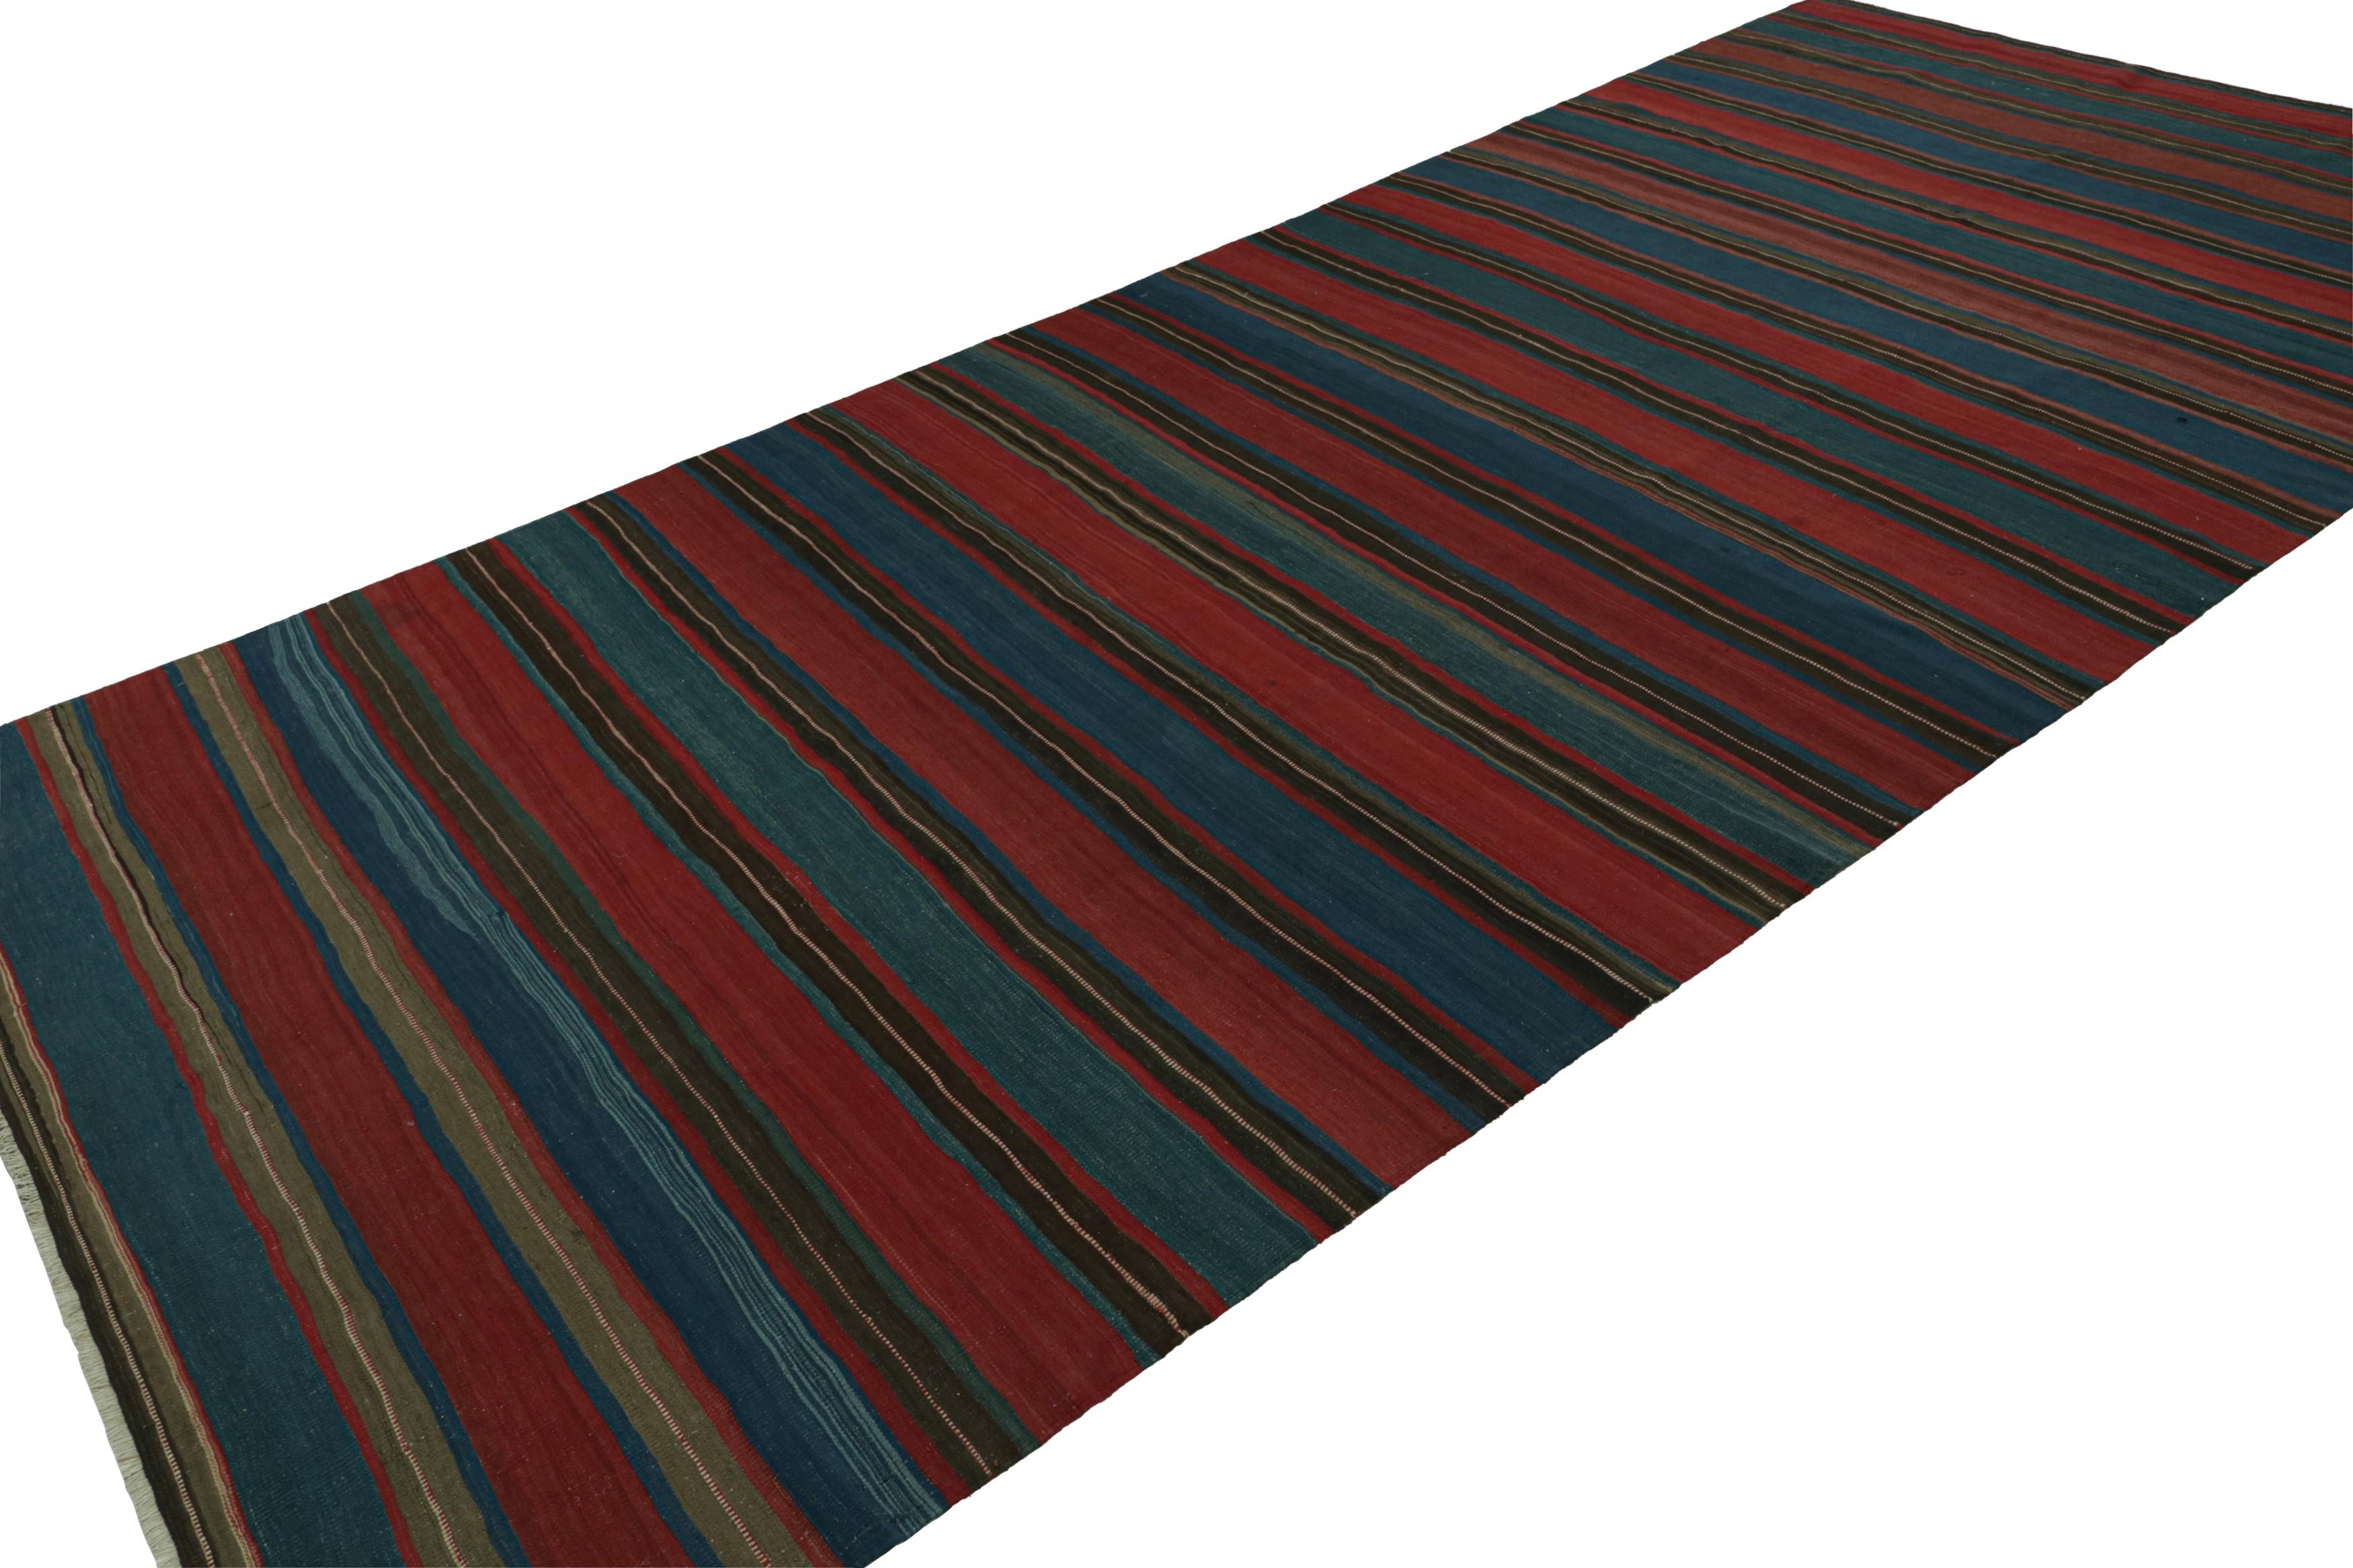 Handwoven in wool, circa 1950-1960, this 7x15 vintage Afghan tribal kilim, features fencepost geometric striped patterns in red and blue, across the entire field. 

On the design: 

As an exciting new curation in Rug & Kilim Collection, this rug 